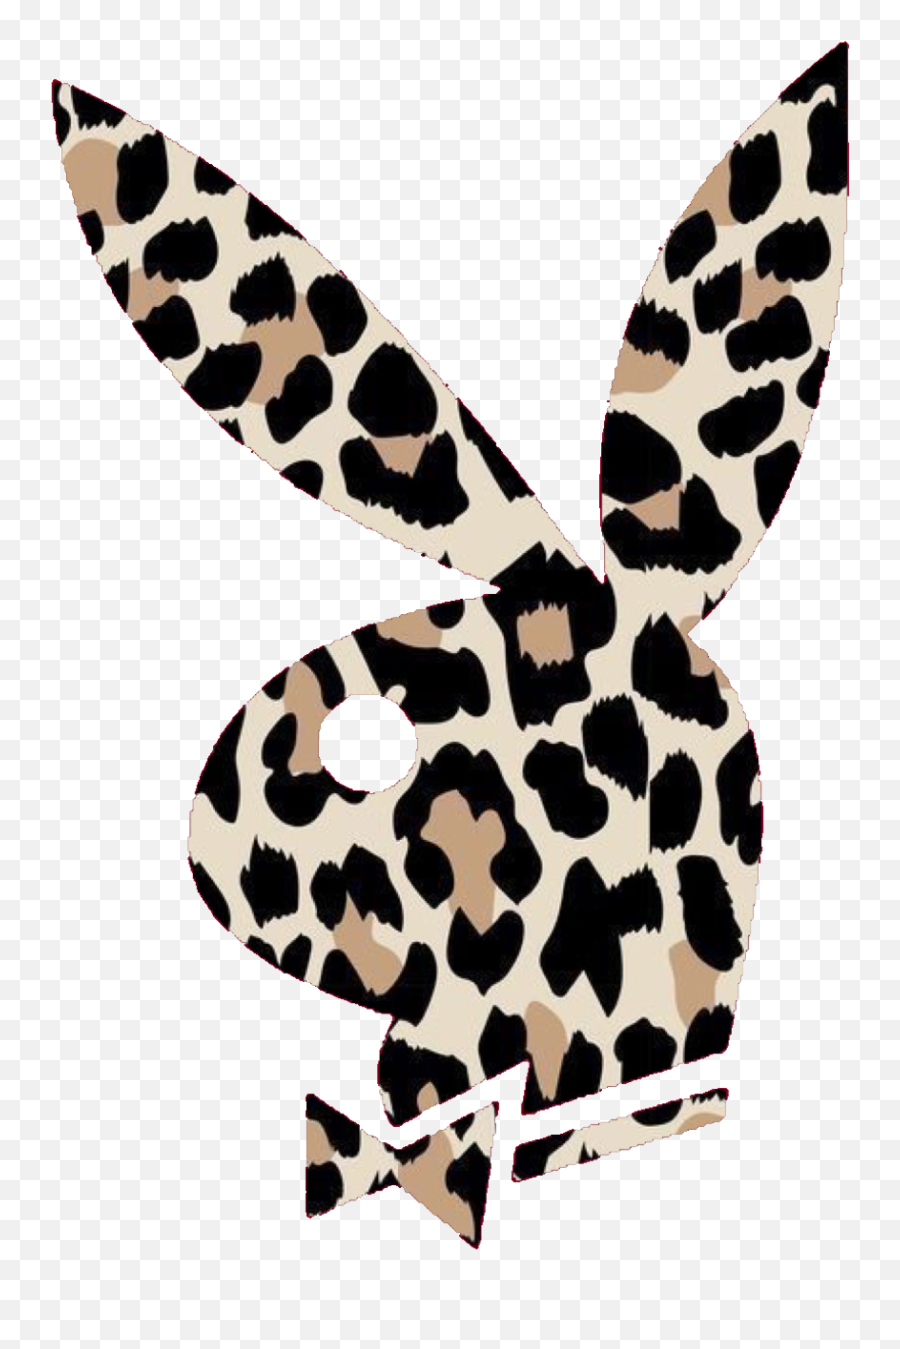 Largest Collection Of Free - Toedit Playboy Bunny Stickers Playboy Aesthetic Stickers Emoji,Playboy Bunnies Emoji